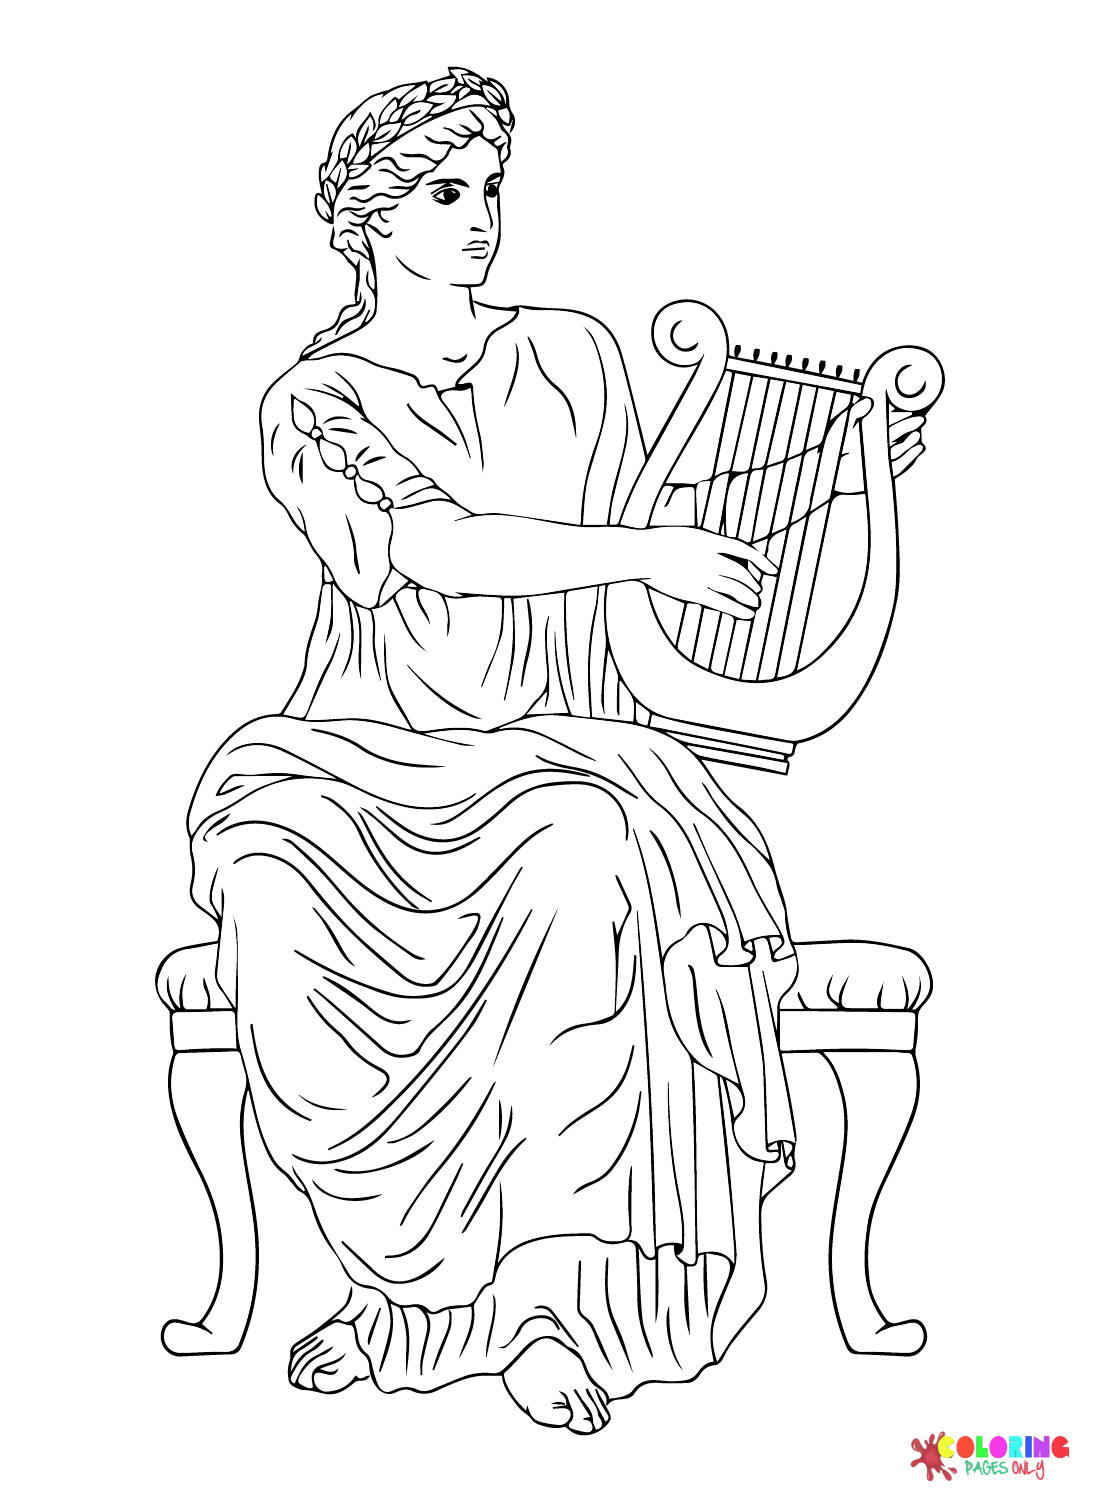 Women Ancient Rome and Roman Empire Coloring Page